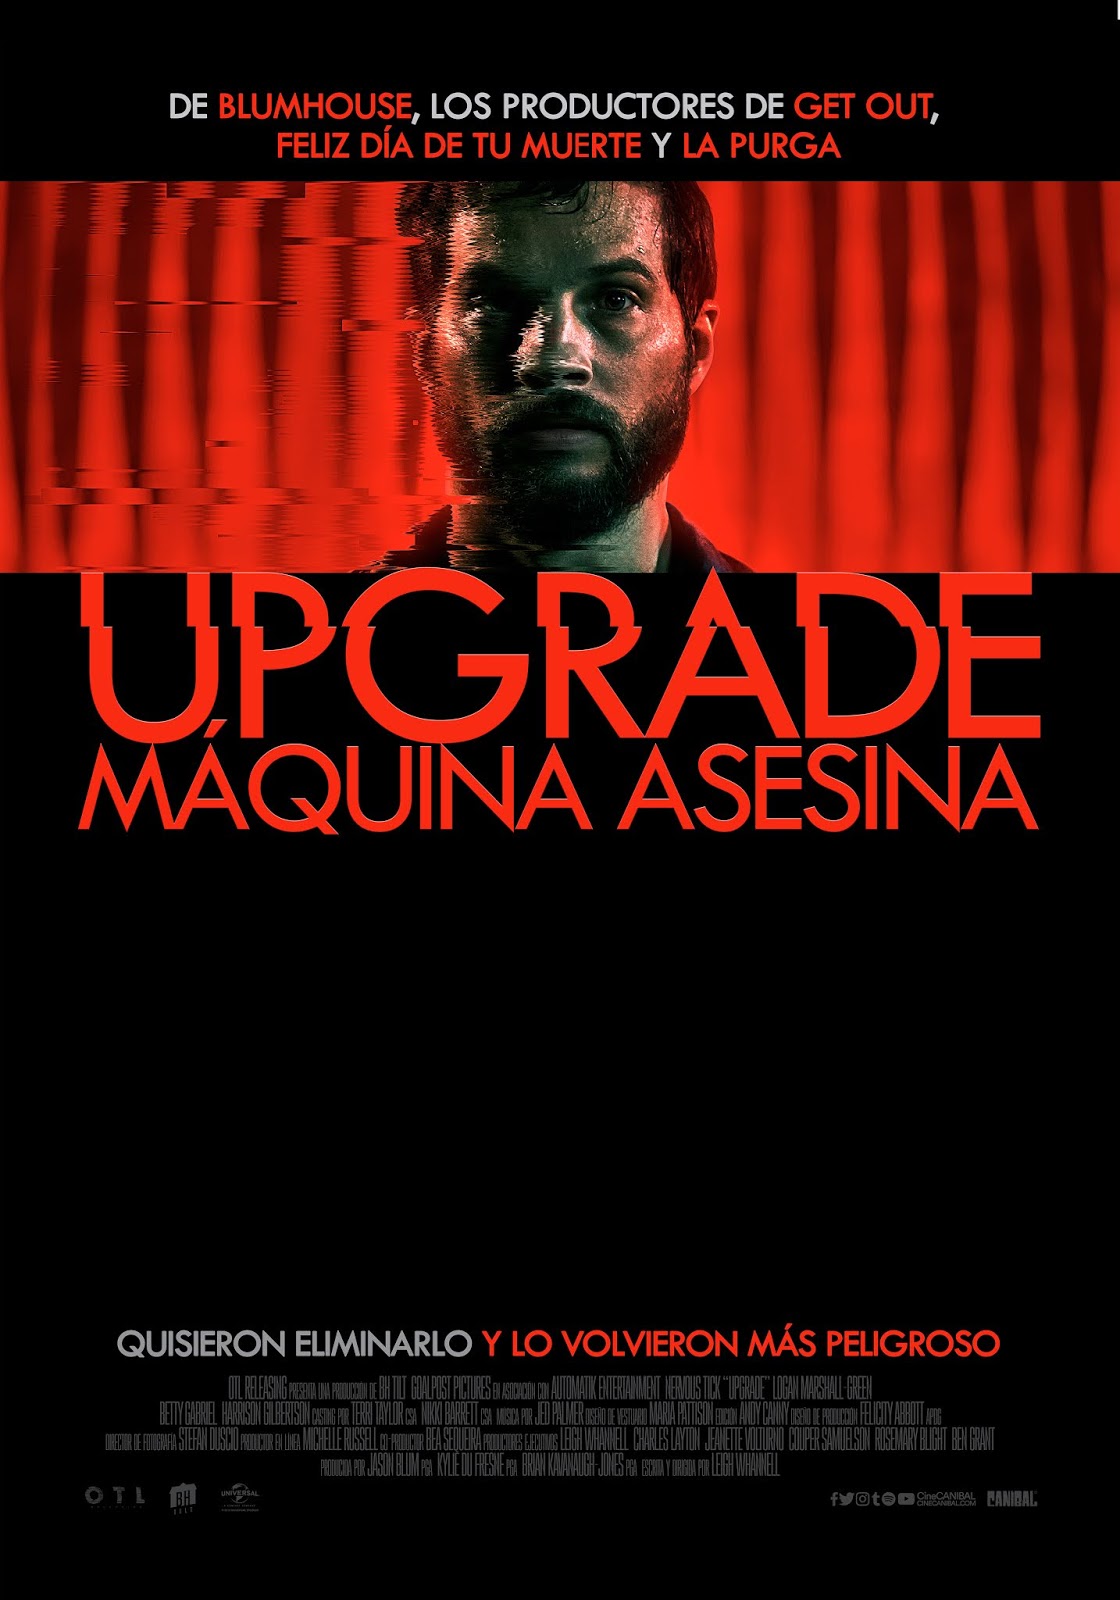 https://static.wikia.nocookie.net/doblaje/images/d/dd/Upgrade_poster_mexico.jpg/revision/latest?cb=20180922021628&path-prefix=es